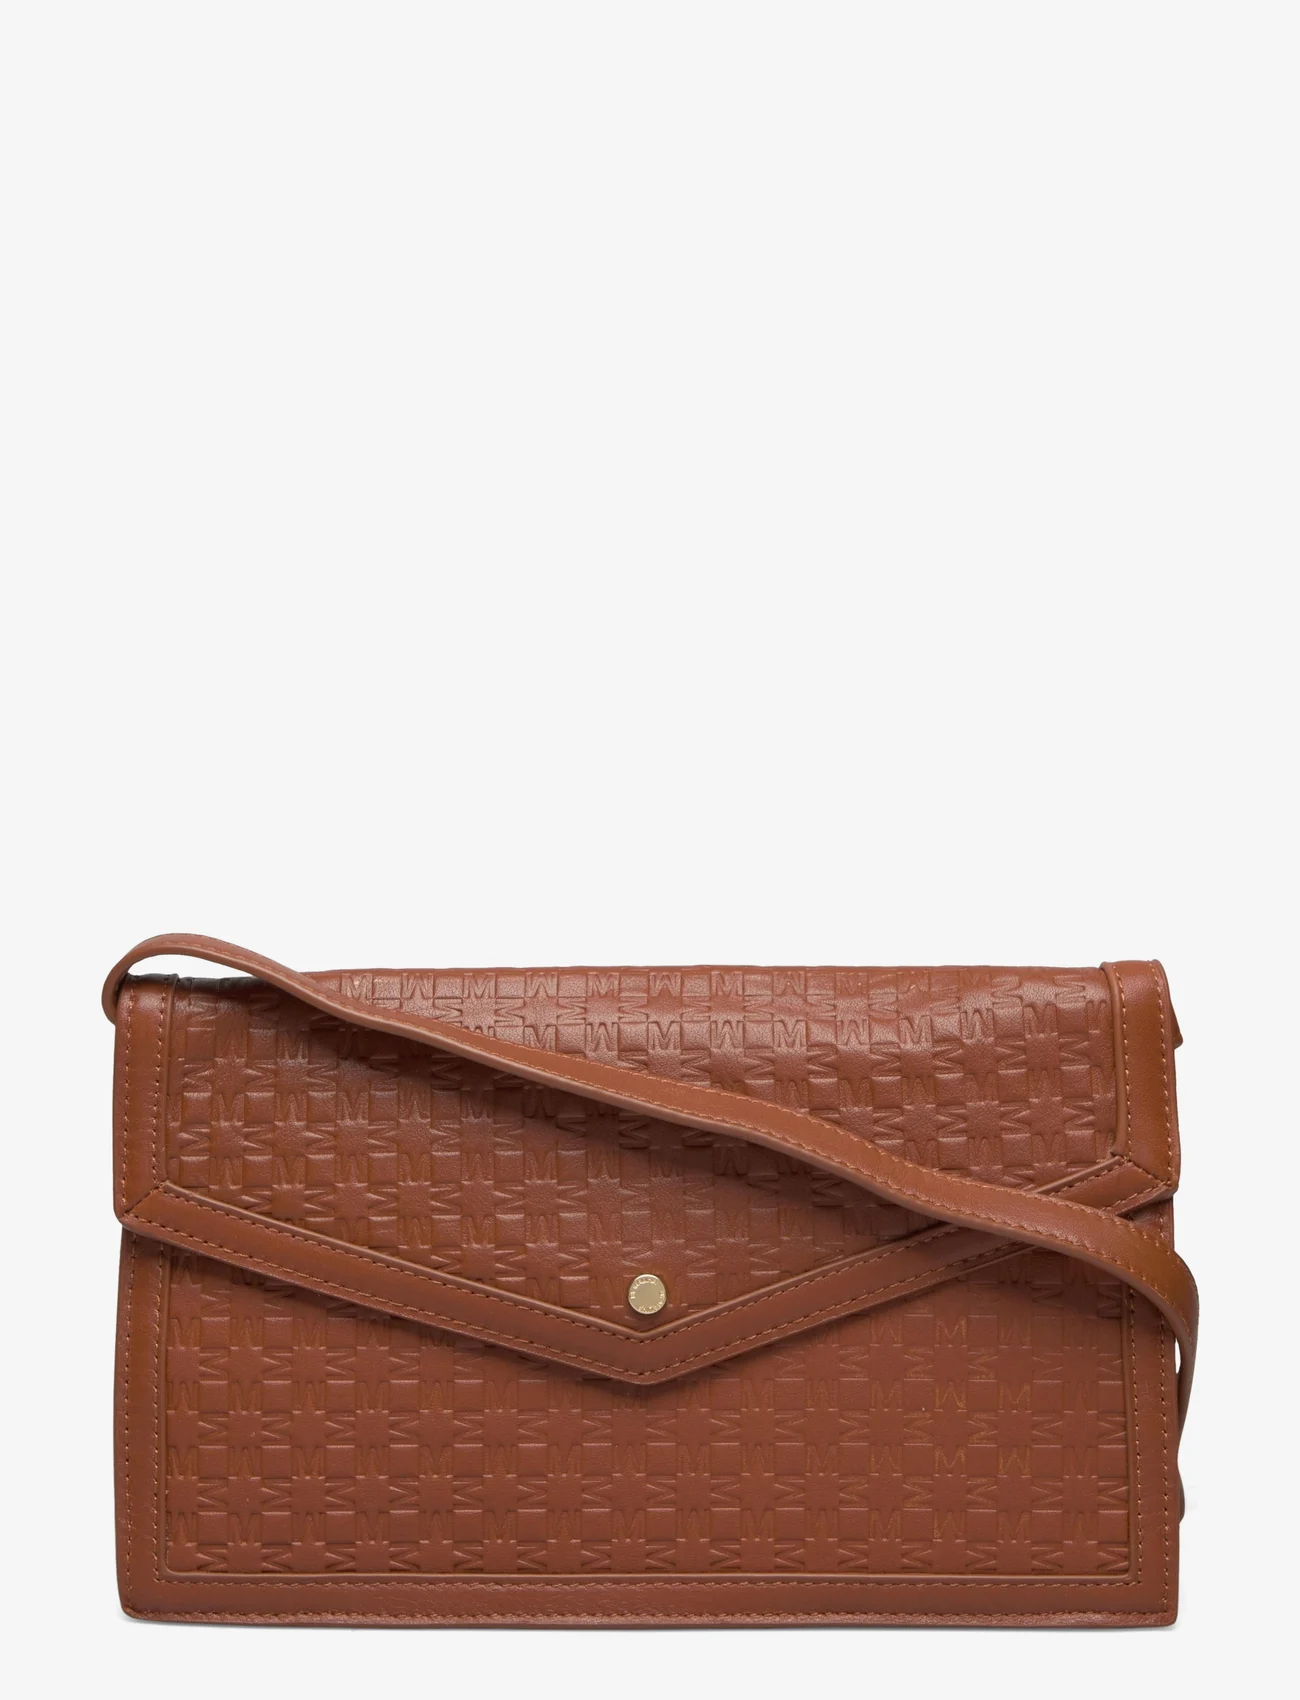 Malina - Leather Envelope Bag - party wear at outlet prices - cognac embossed - 0